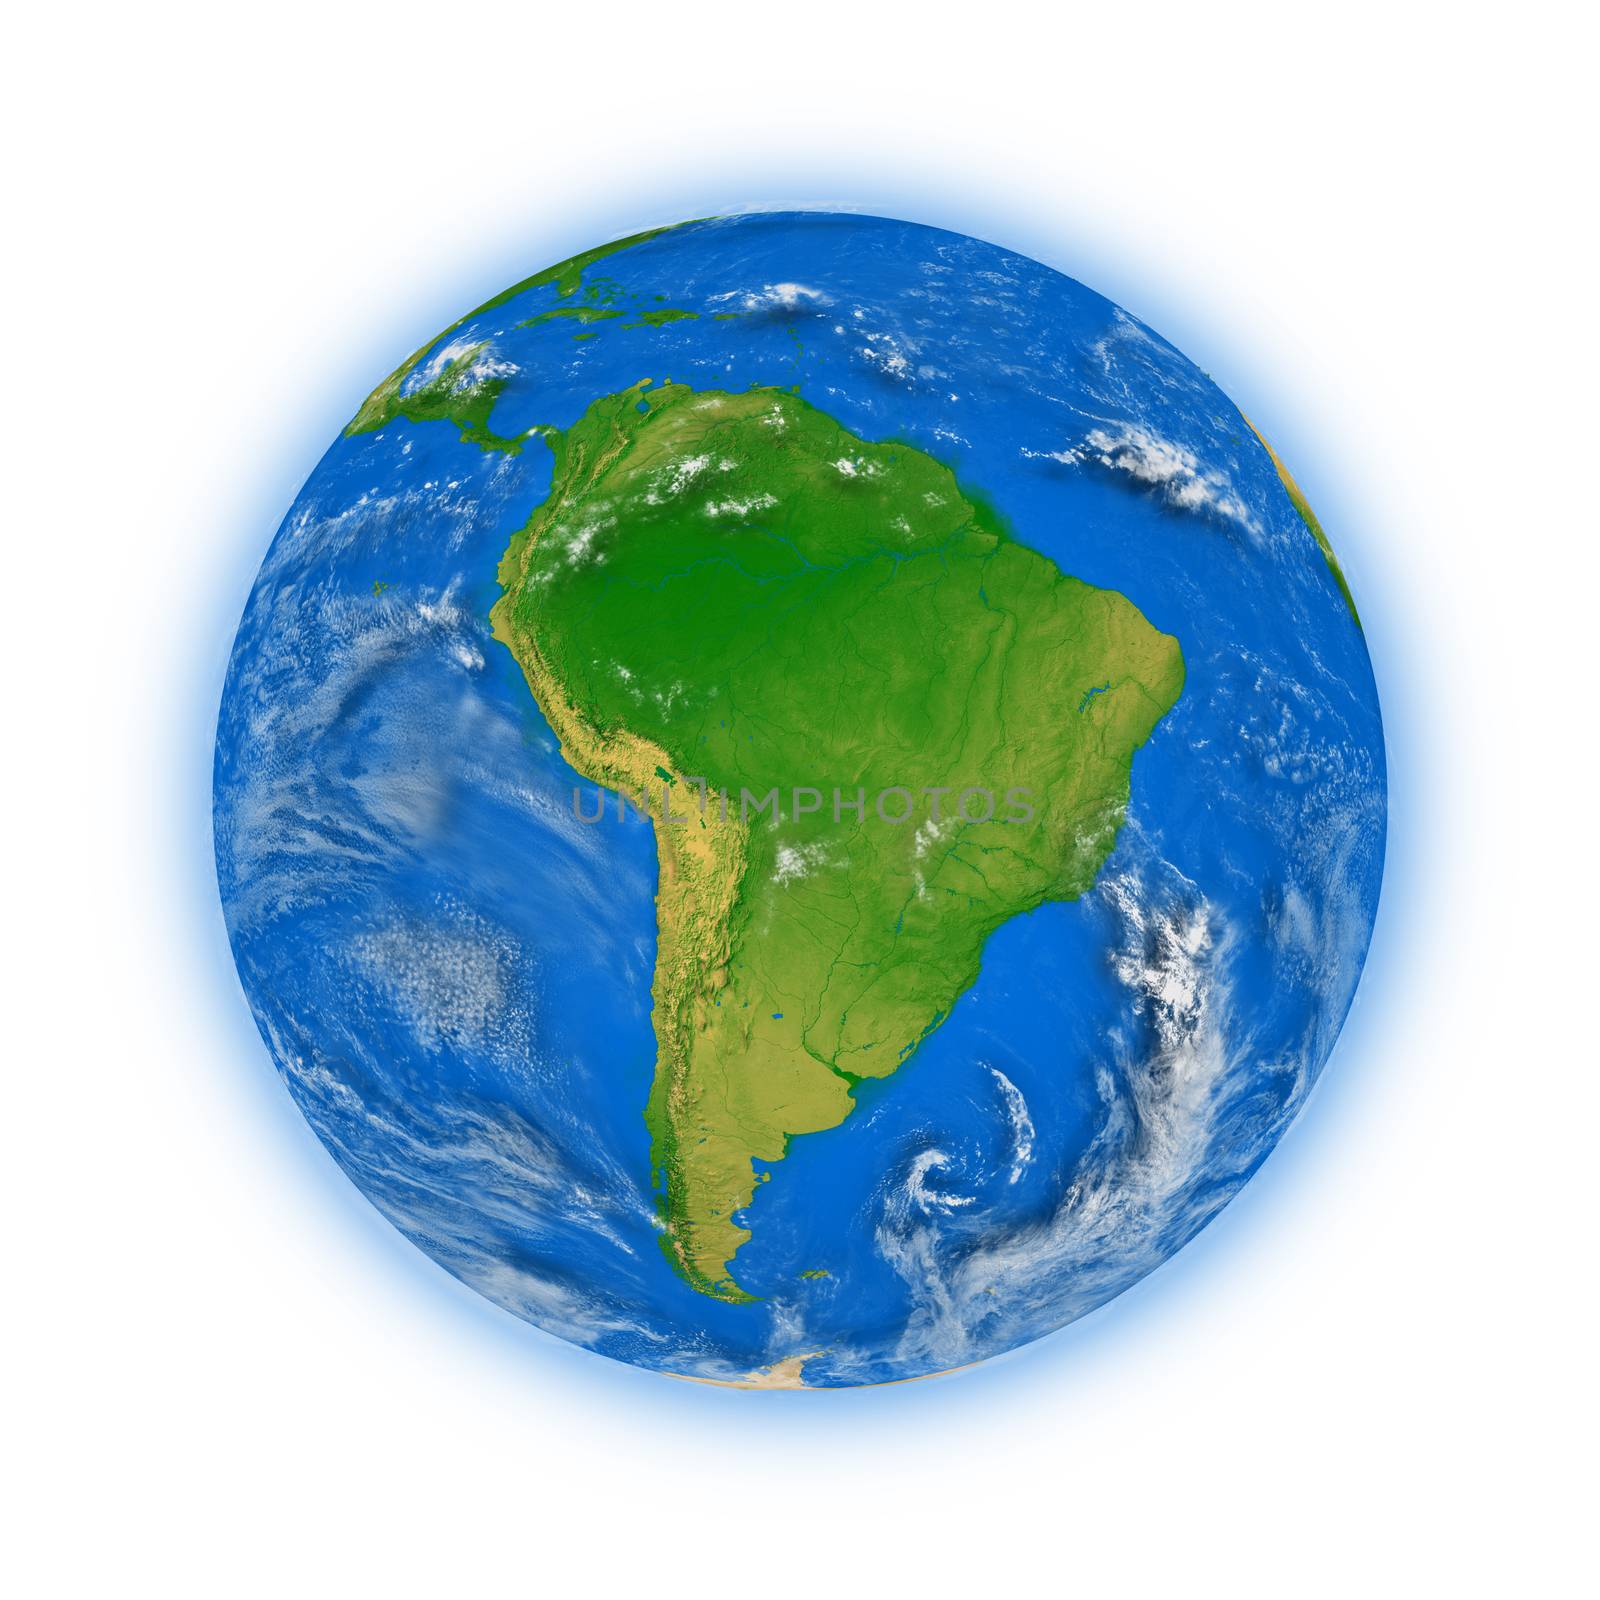 South America on blue planet Earth isolated on white background. Highly detailed planet surface. Elements of this image furnished by NASA.